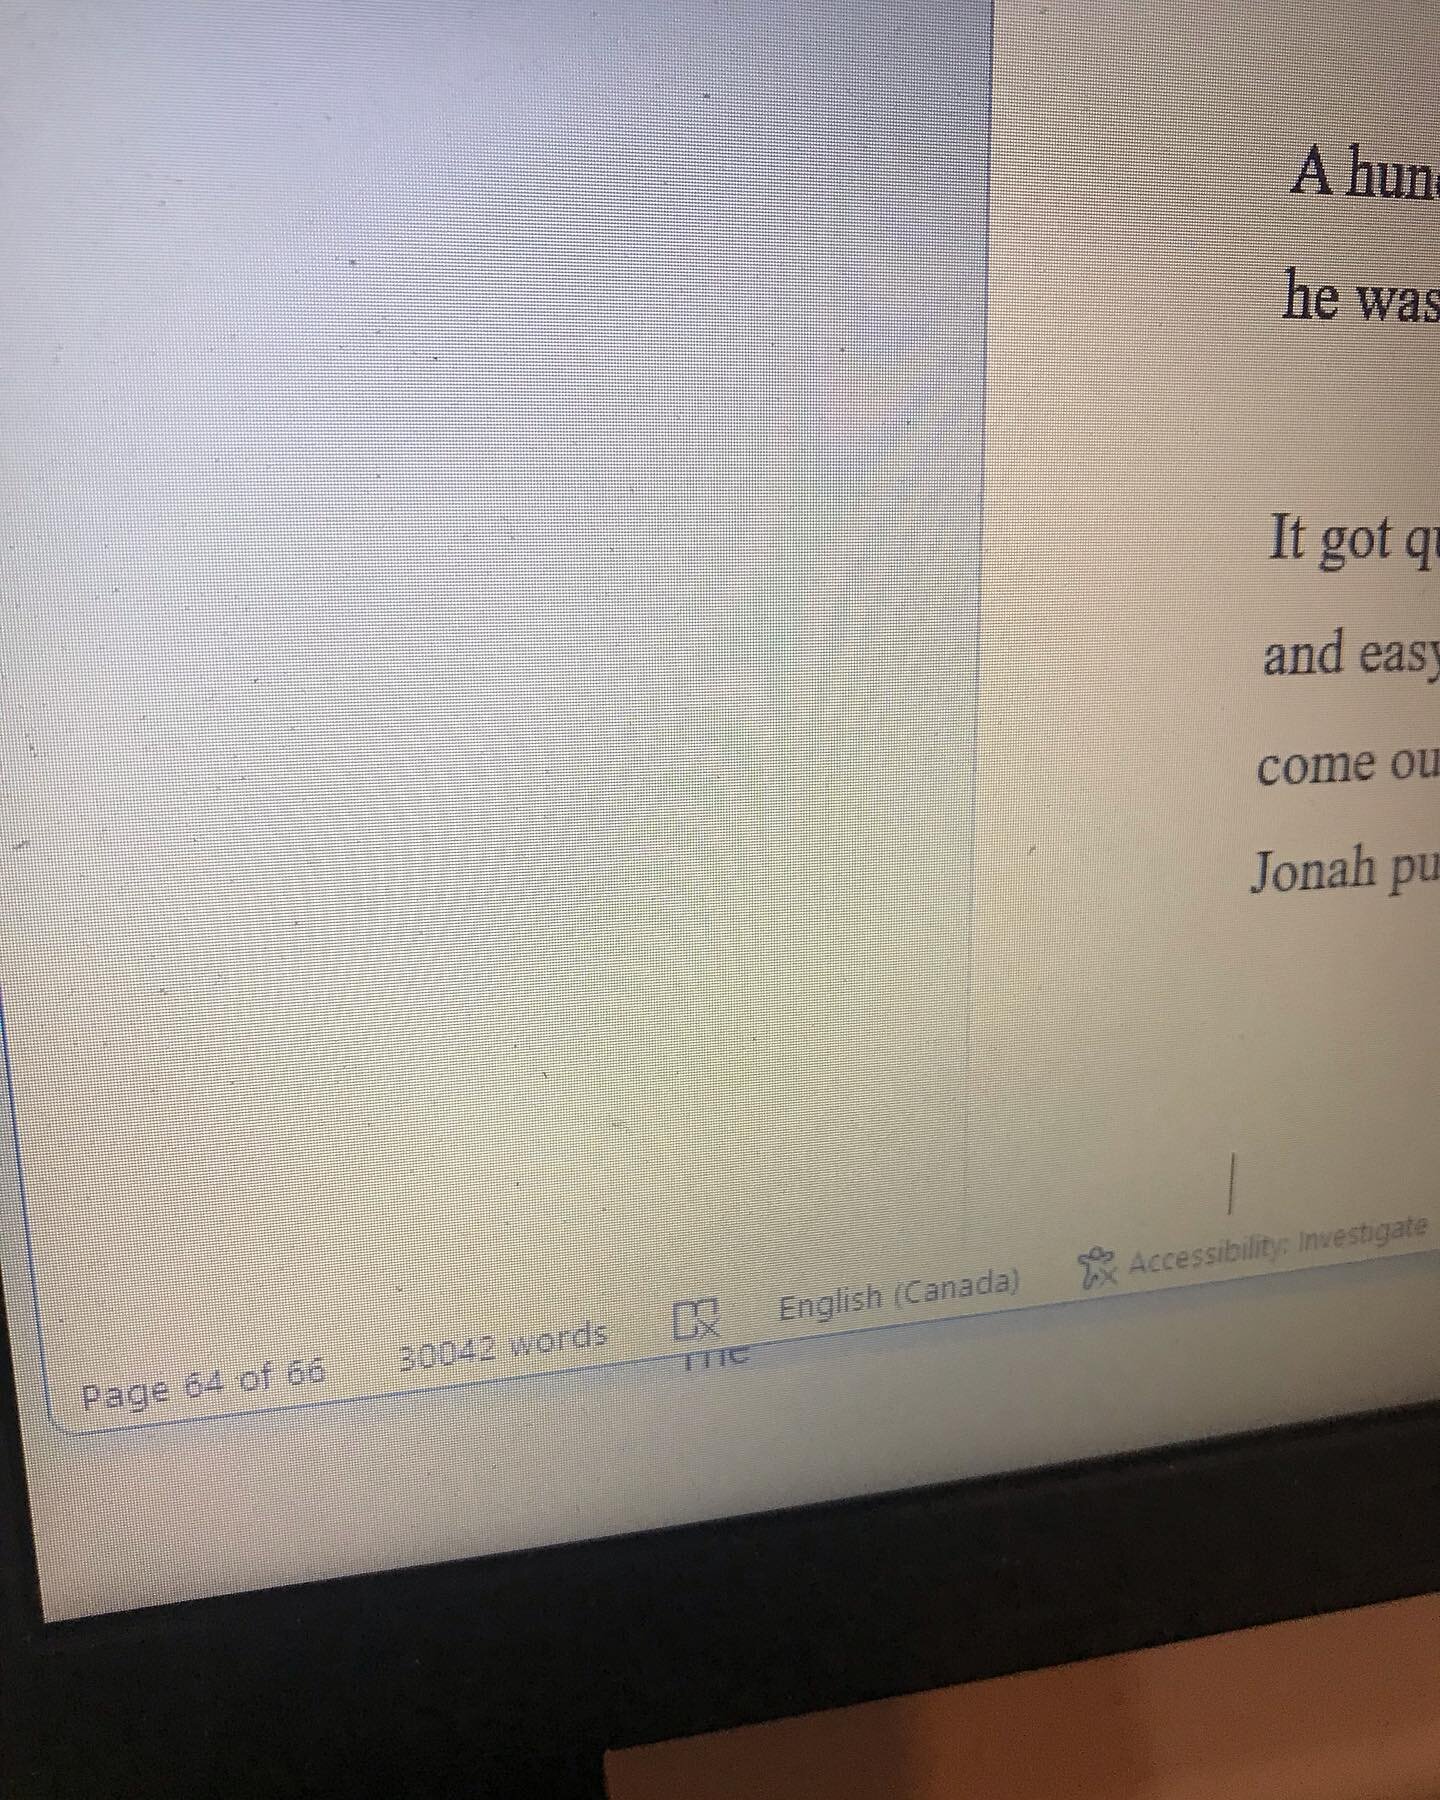 Just cracked 30K on the shitty first draft! #writersofinstagram #carnival #first novel #canadianwriter